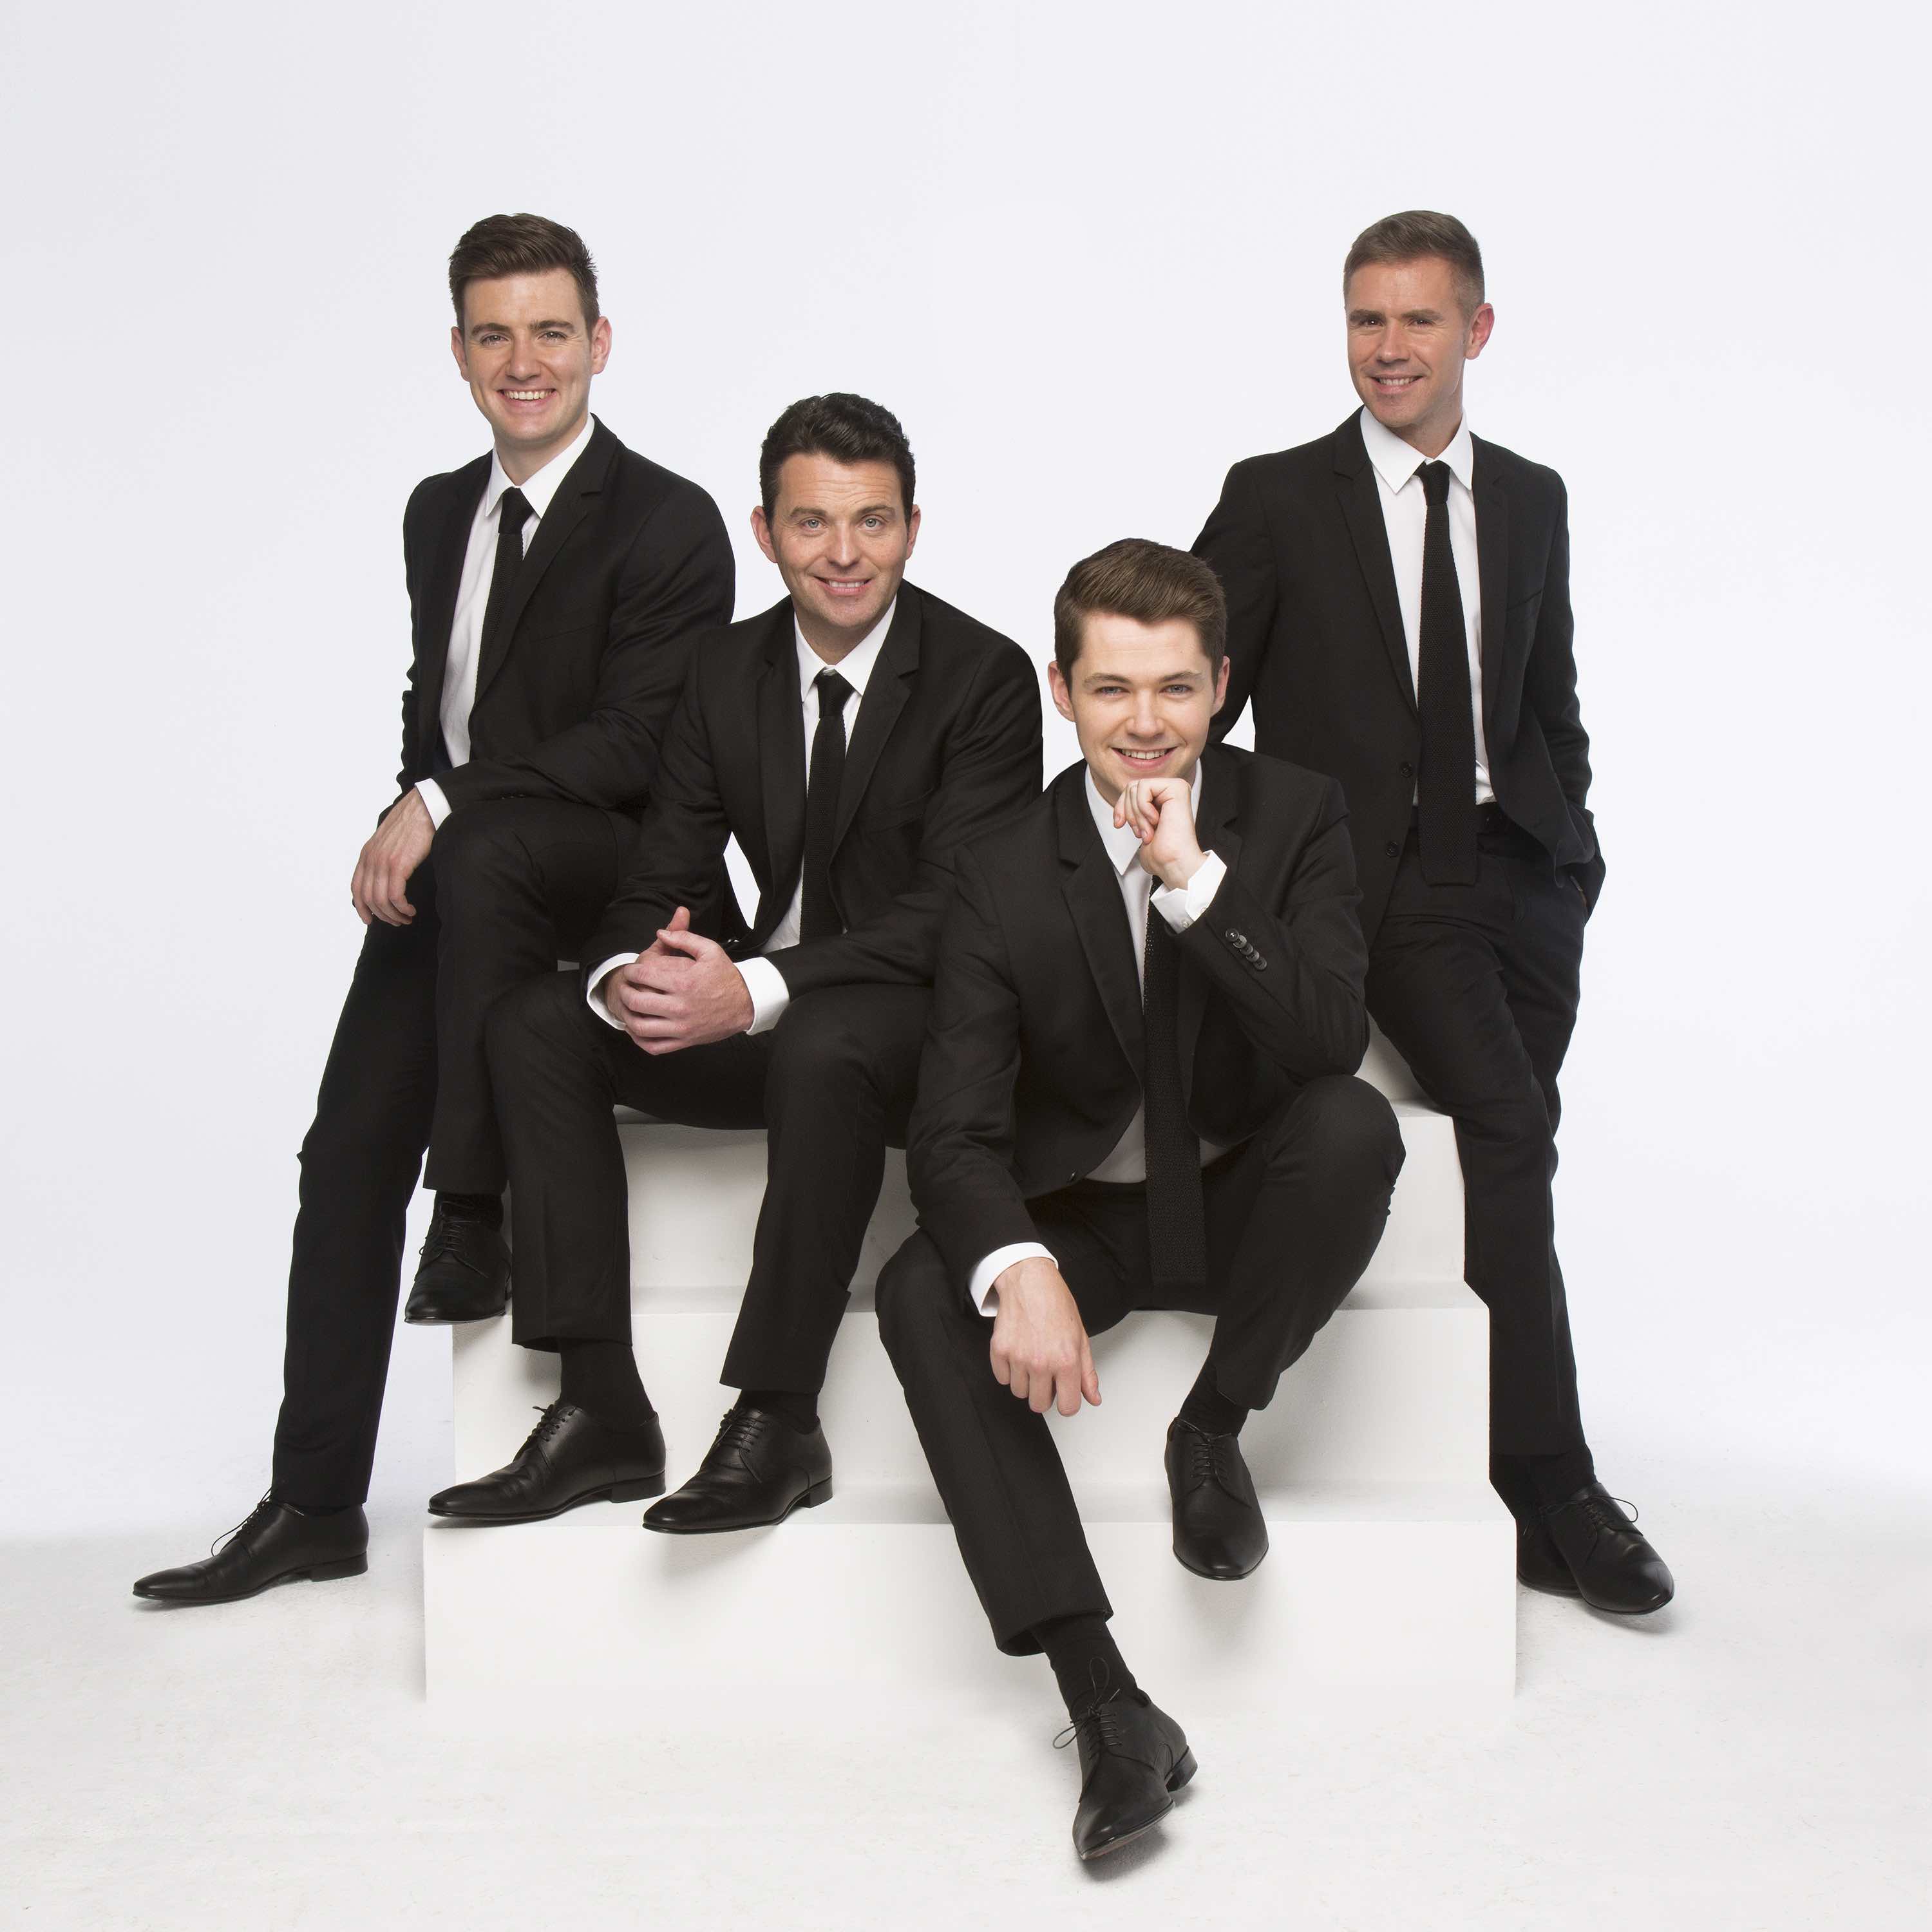 Celtic Thunder Feb 3, 2021 Tickets 15 USD (150 StageIt Notes